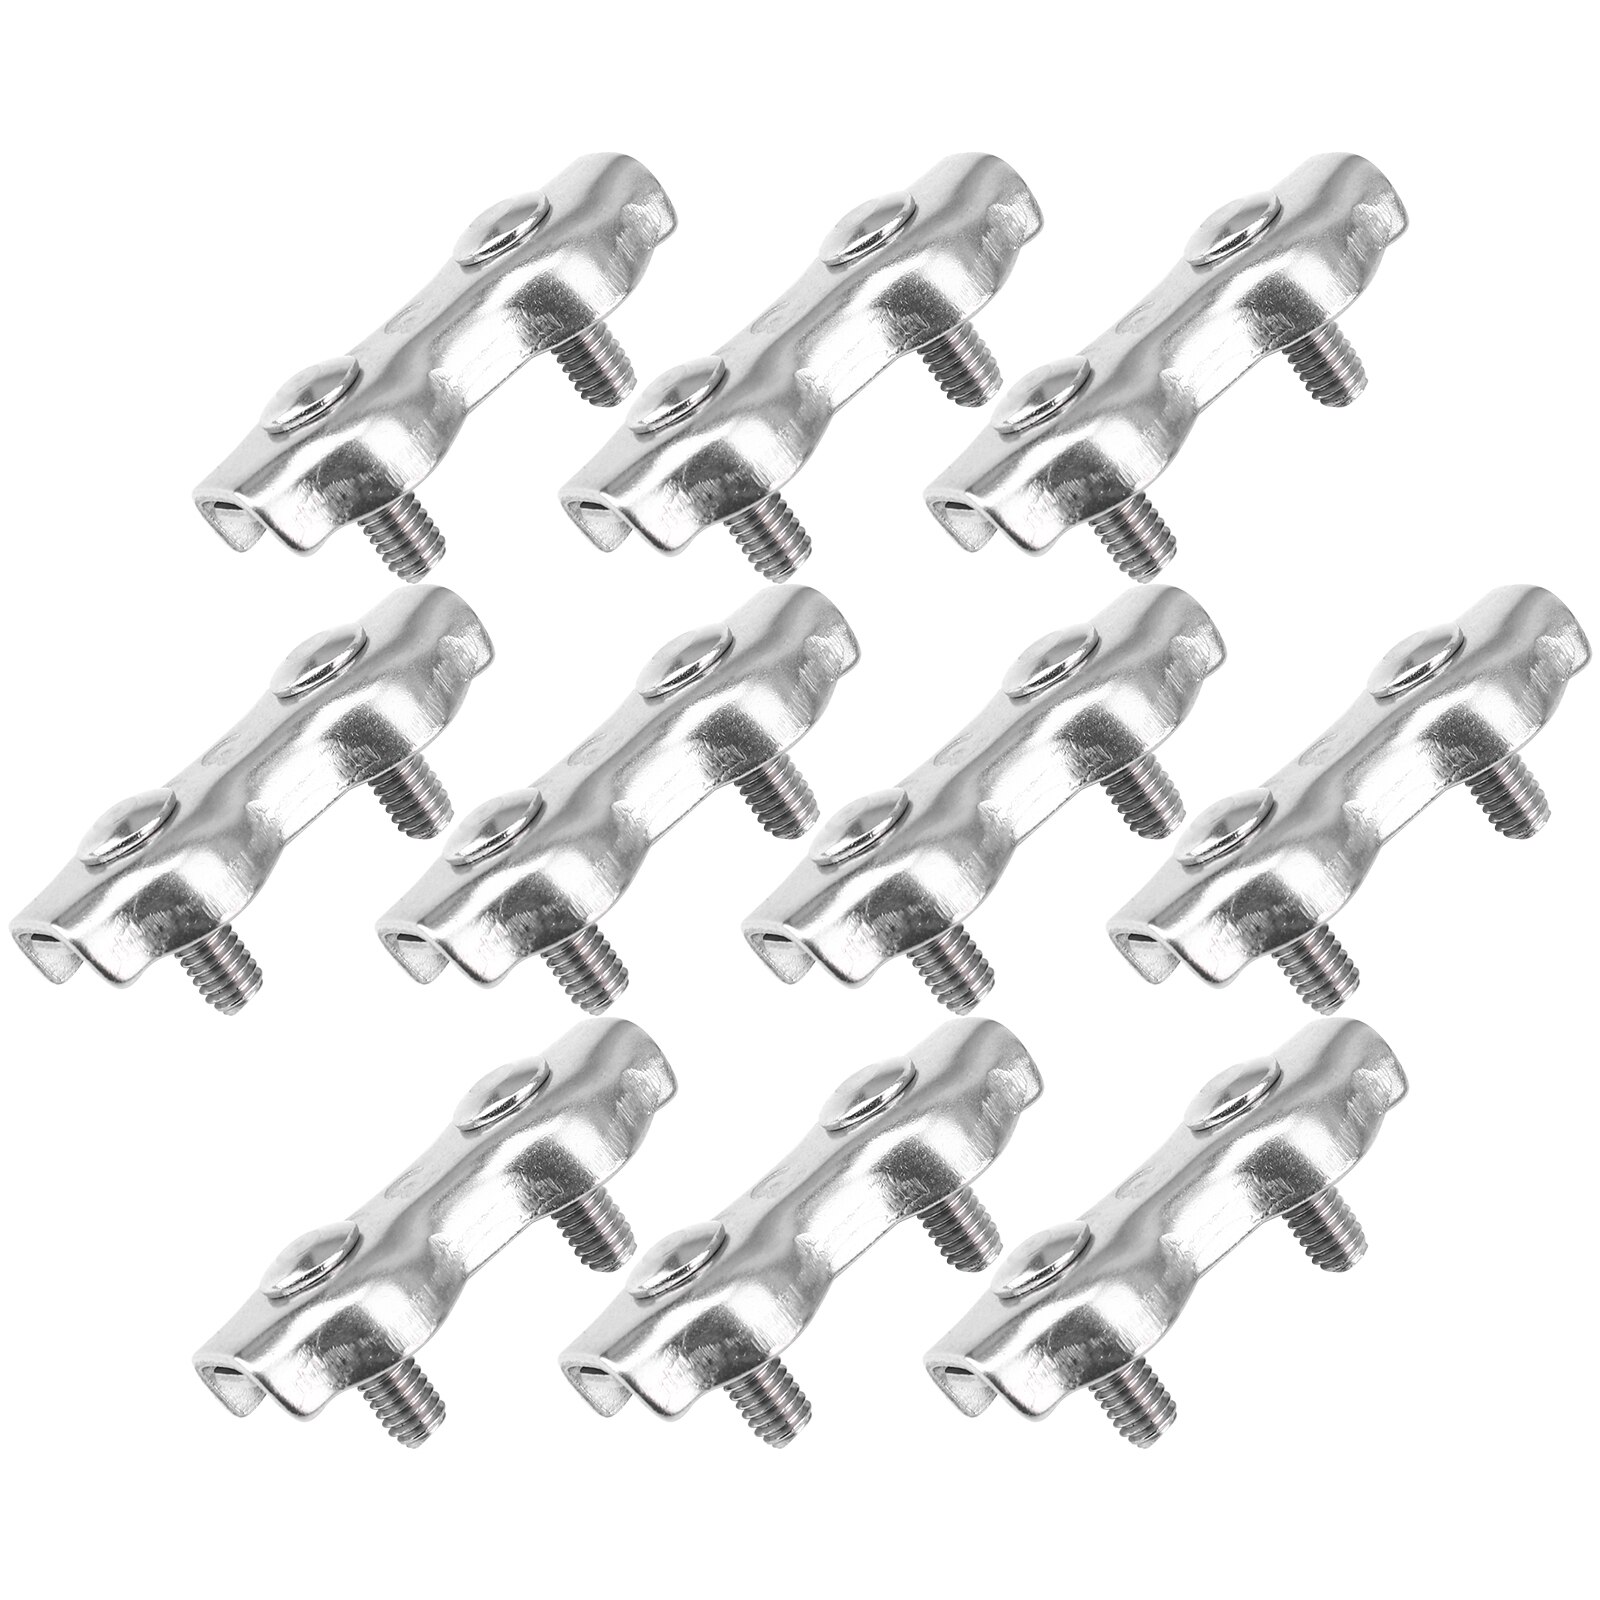 10 Pcs Rope Connector Duplex Wires Splicer Stainless Wire Rope Clip Cable Clamp